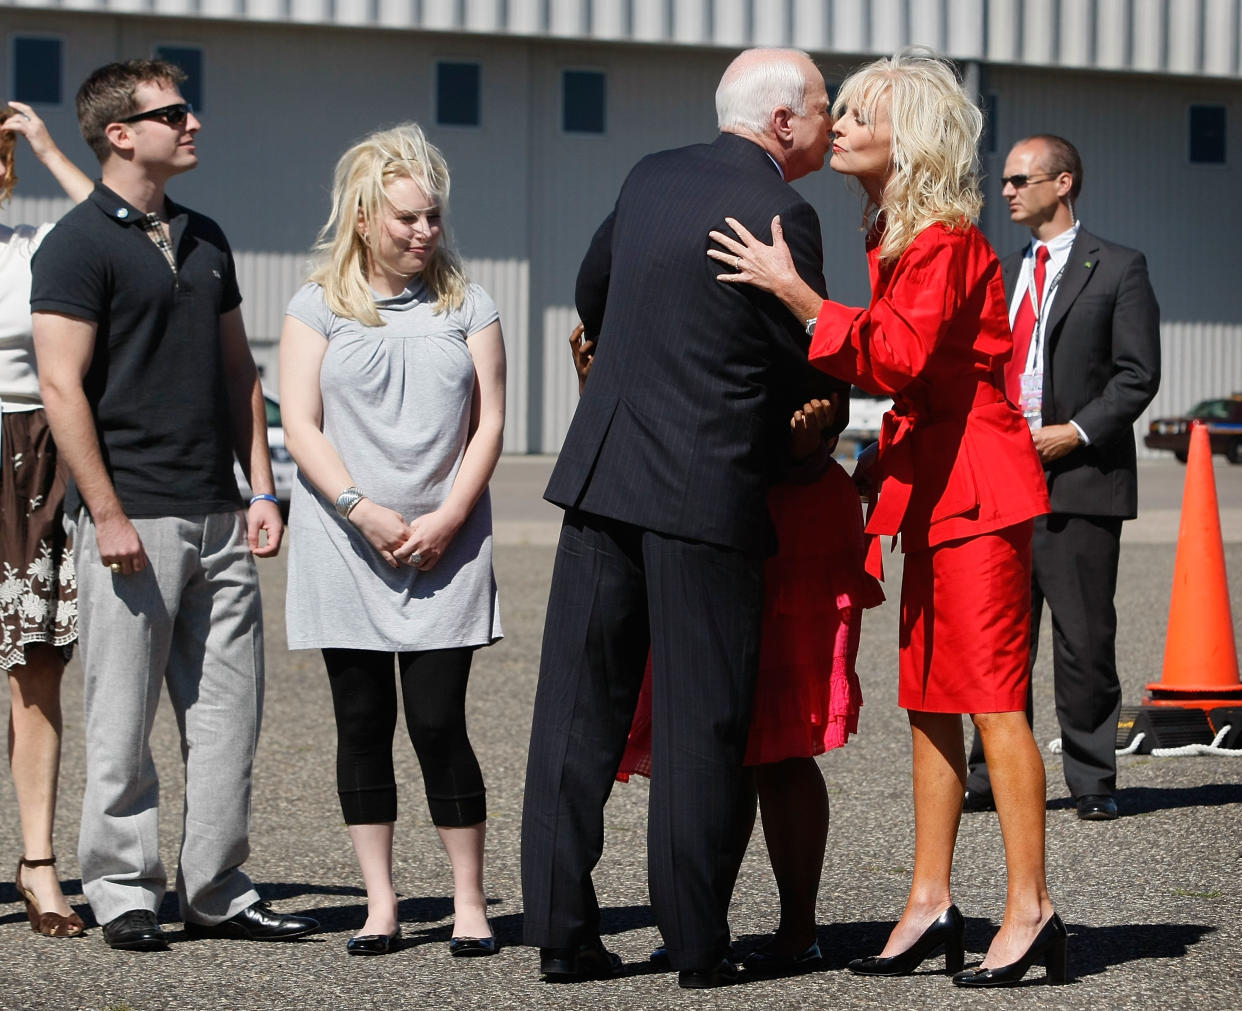 MINNEAPOLIS, MN- SEPTEMBER 03:  Presumptive Republican presidential nominee John McCain (R-AZ) is greeted by his wife Cindy and his children Jack McCain and daughter Meghan McCain as he arrives at the Minneapolis/St Paul International airport September 3, 2008 in Minneapolis, Minnesota. McCain arrived for his appearance at the Republican National Convention.  (Photo by Joe Raedle/Getty Images)